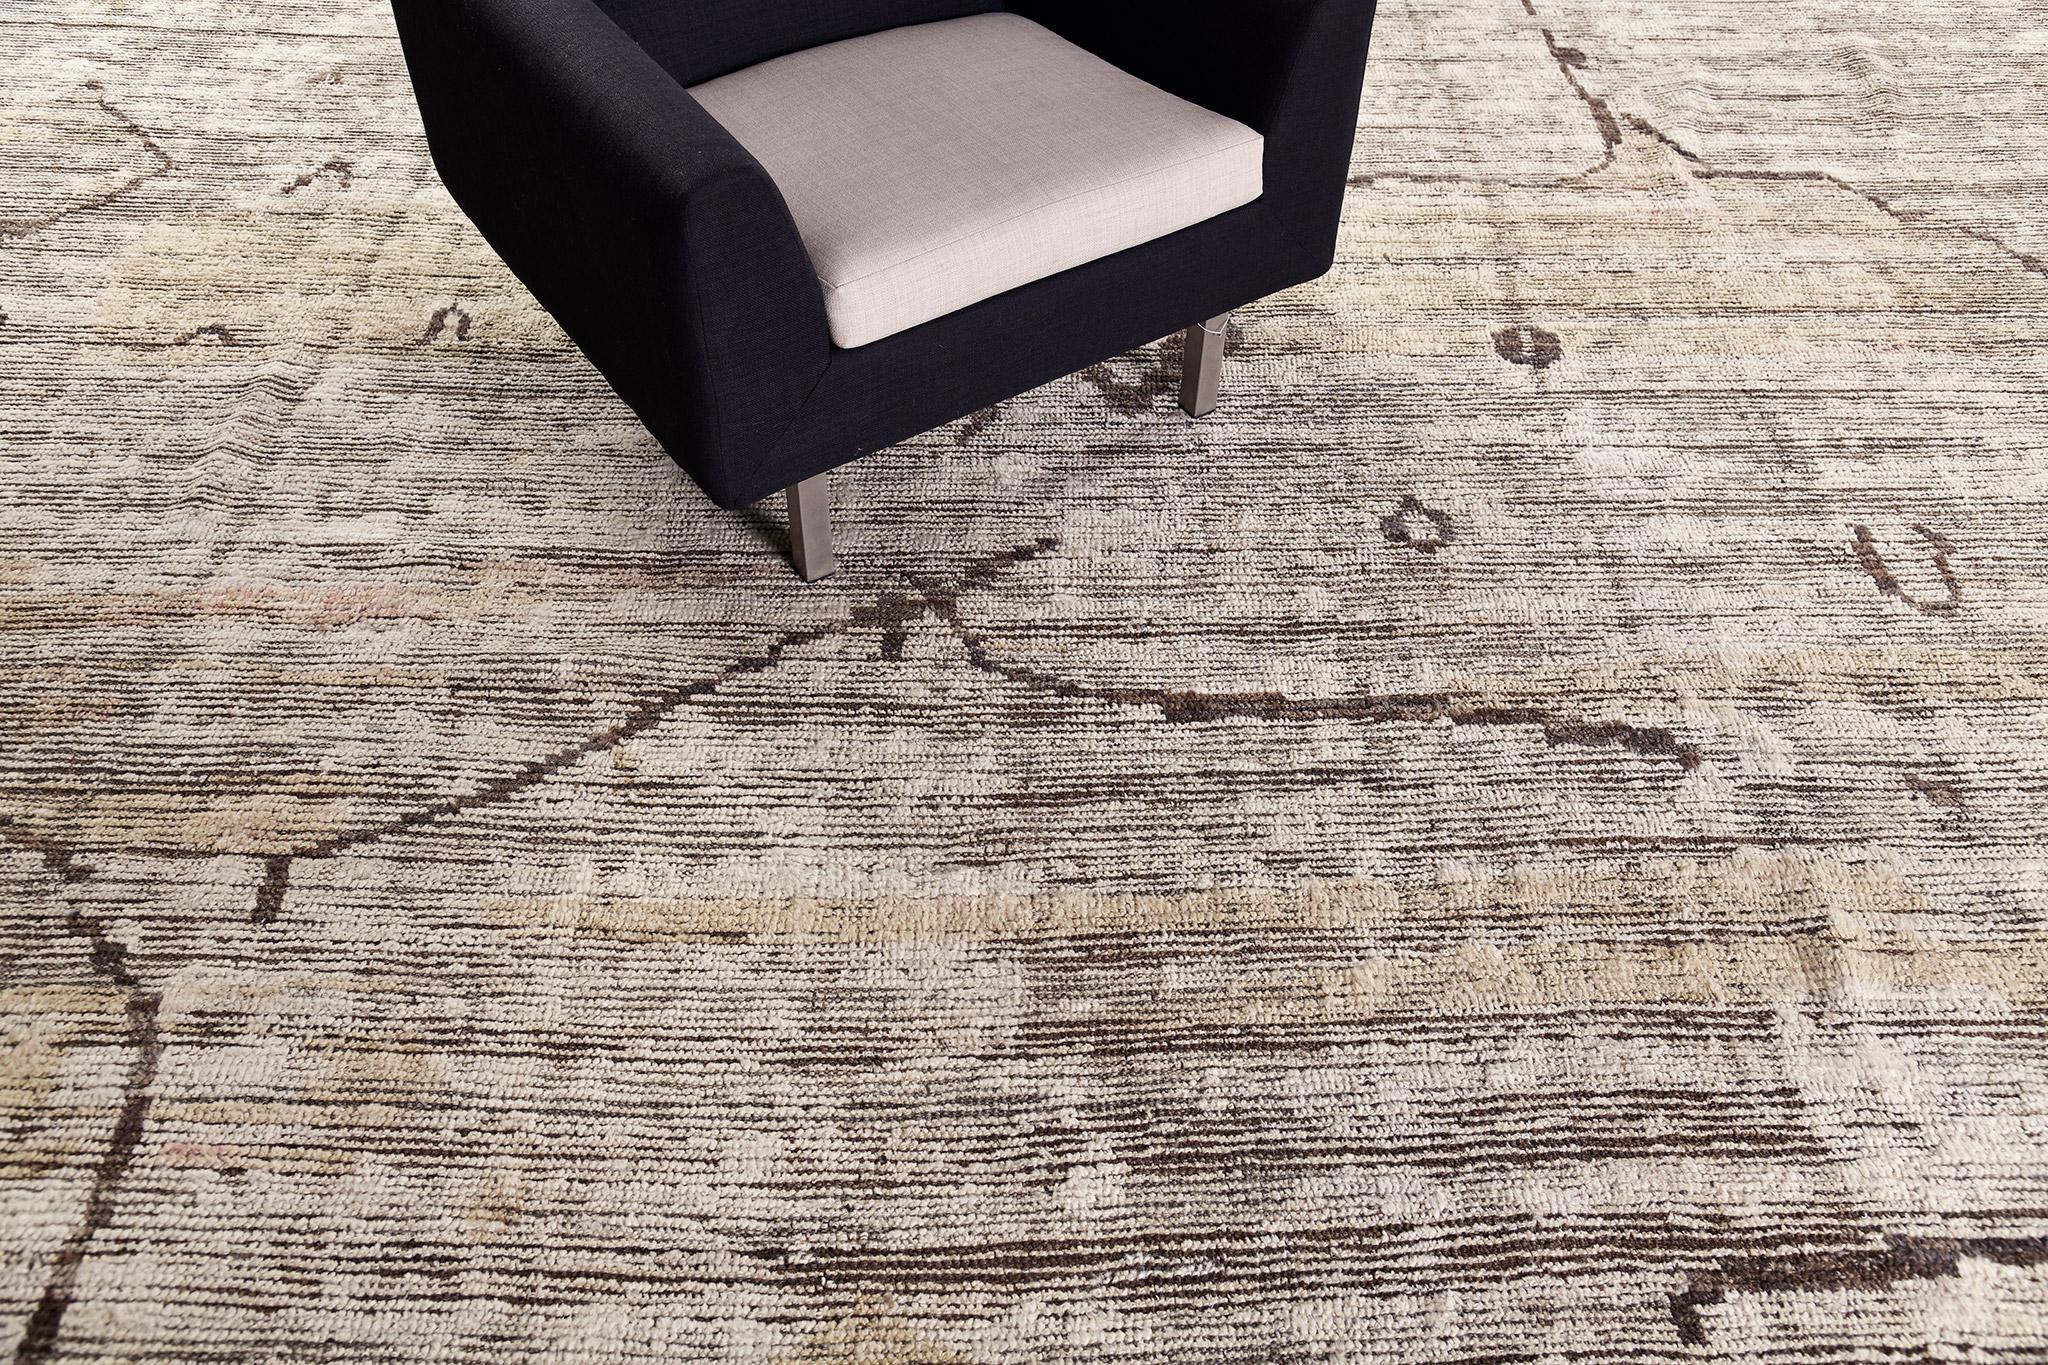 Snug your feet around with this stunning creation from our Atlas Collections. An impressive Adrar Rug that transforms your room into a modern-contemporary home interior. Natural earth tones colors are impressively incorporated in their details with